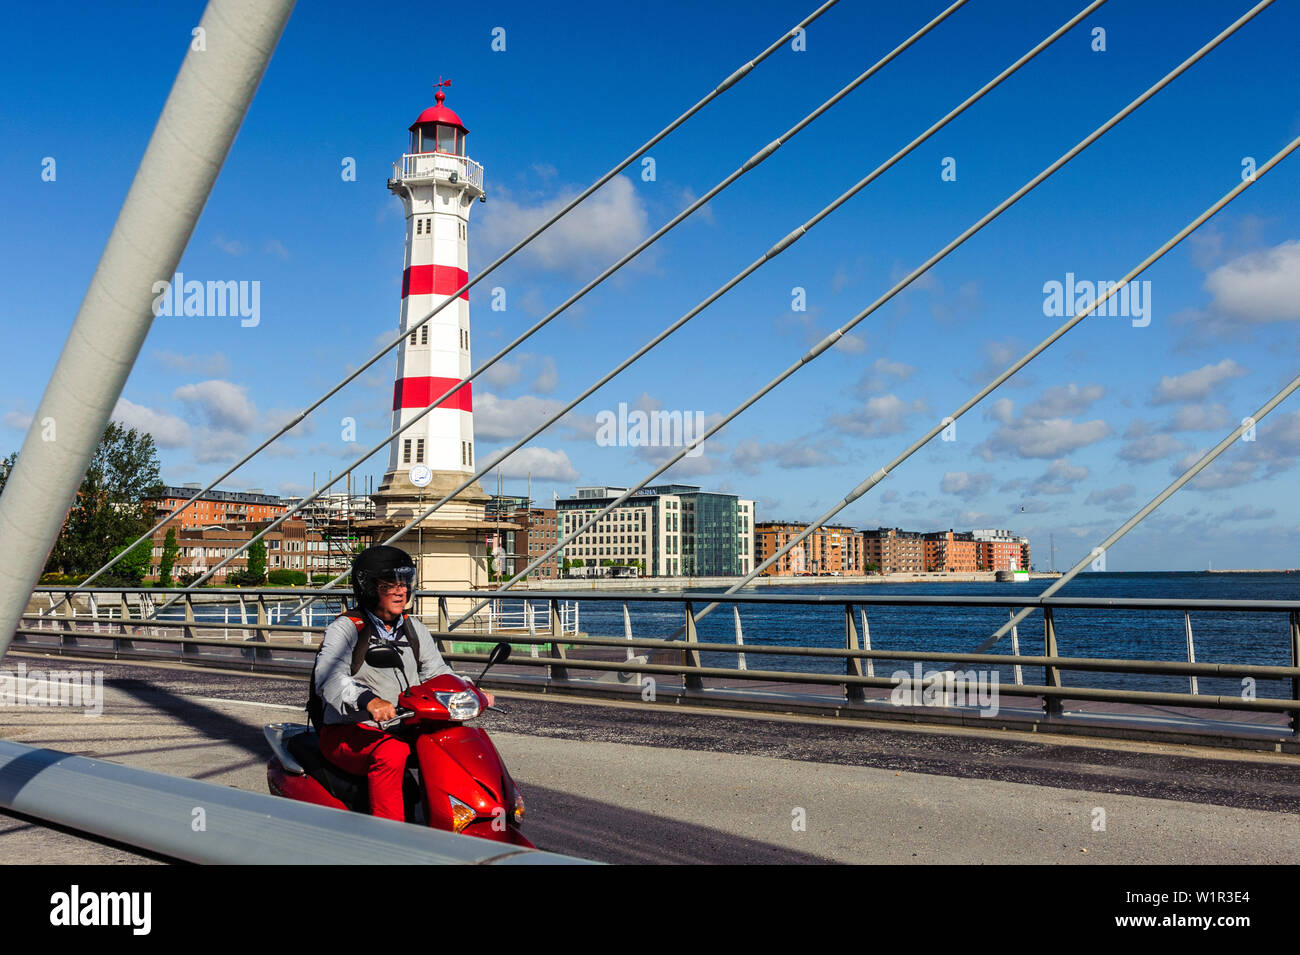 Red white lighthouse in sarnated harbor area, red scooter in foreground on a bridge, Malmo Southern Sweden, Sweden Stock Photo